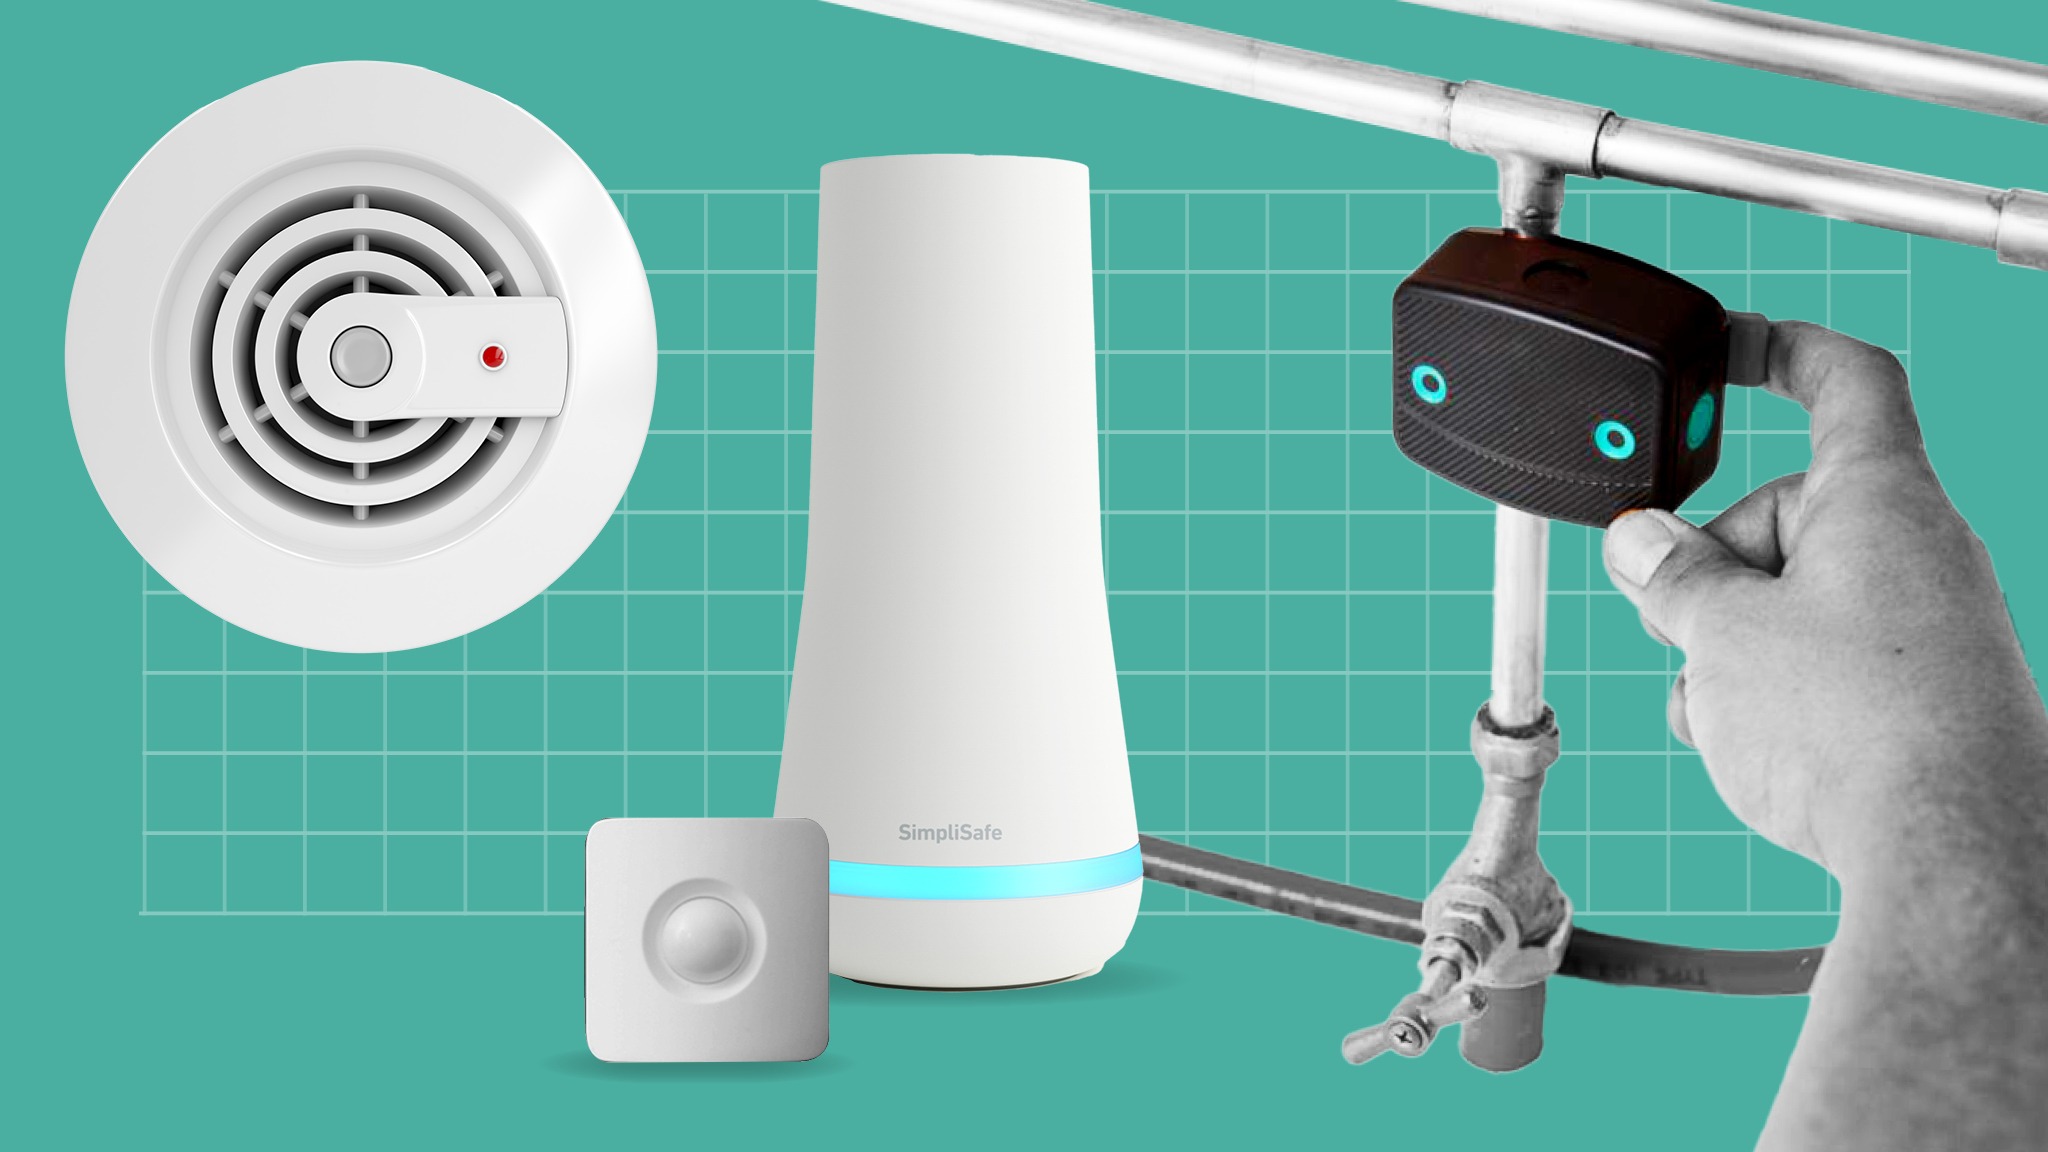 An Ondo Insurtech Leakbot, a Simplisafe base station and motion detector, a smoke and carbon dioxide alarm